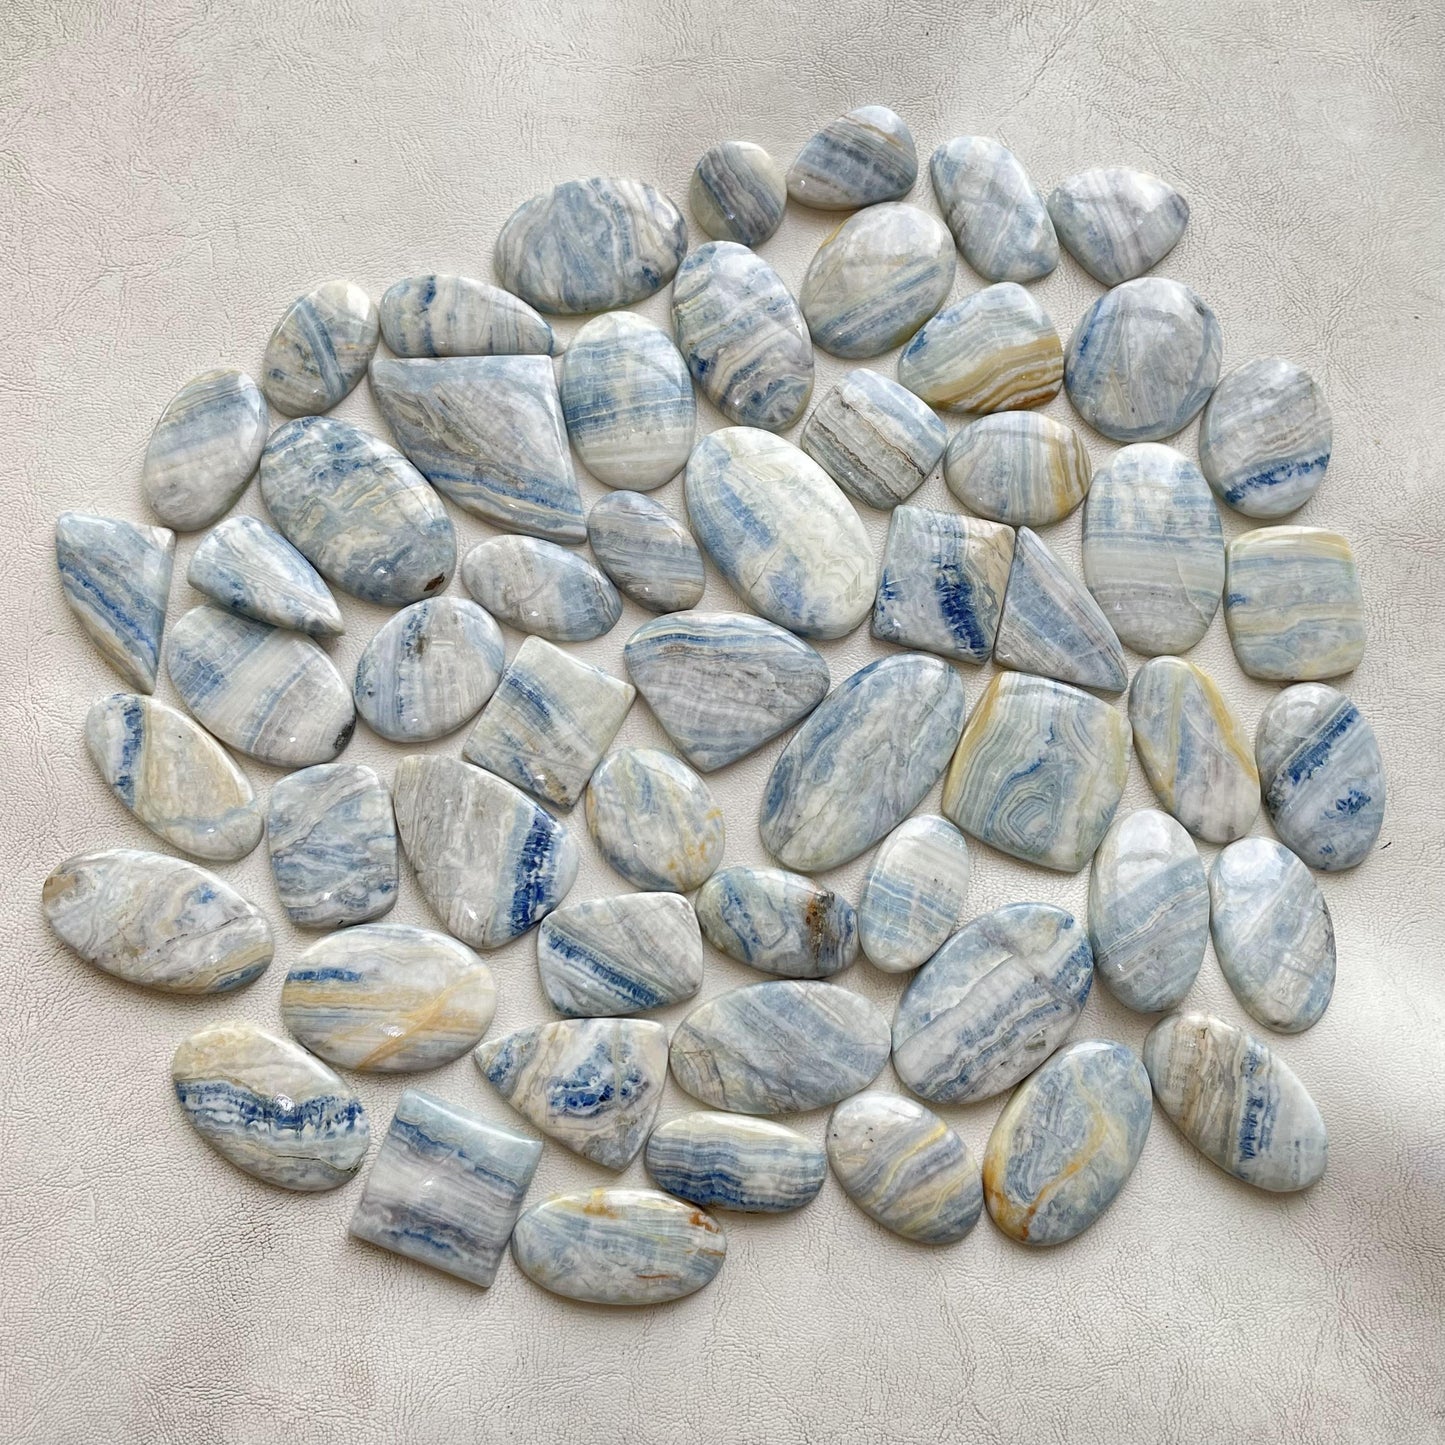 Natural Blue Rhodochrosite Cabochon Wholesale Lot By Weight With Different Shapes And Sizes Used For Jewelry Making